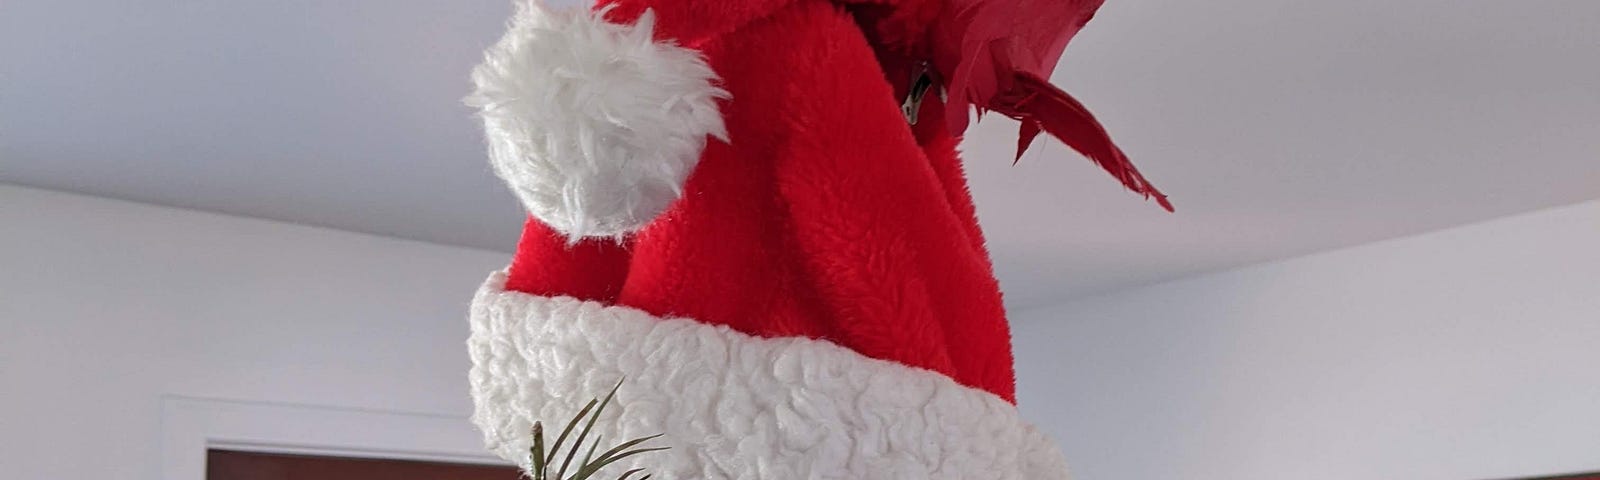 A Santa Claus hat tops the author’s xmas tree, A red cardinal tops the hat